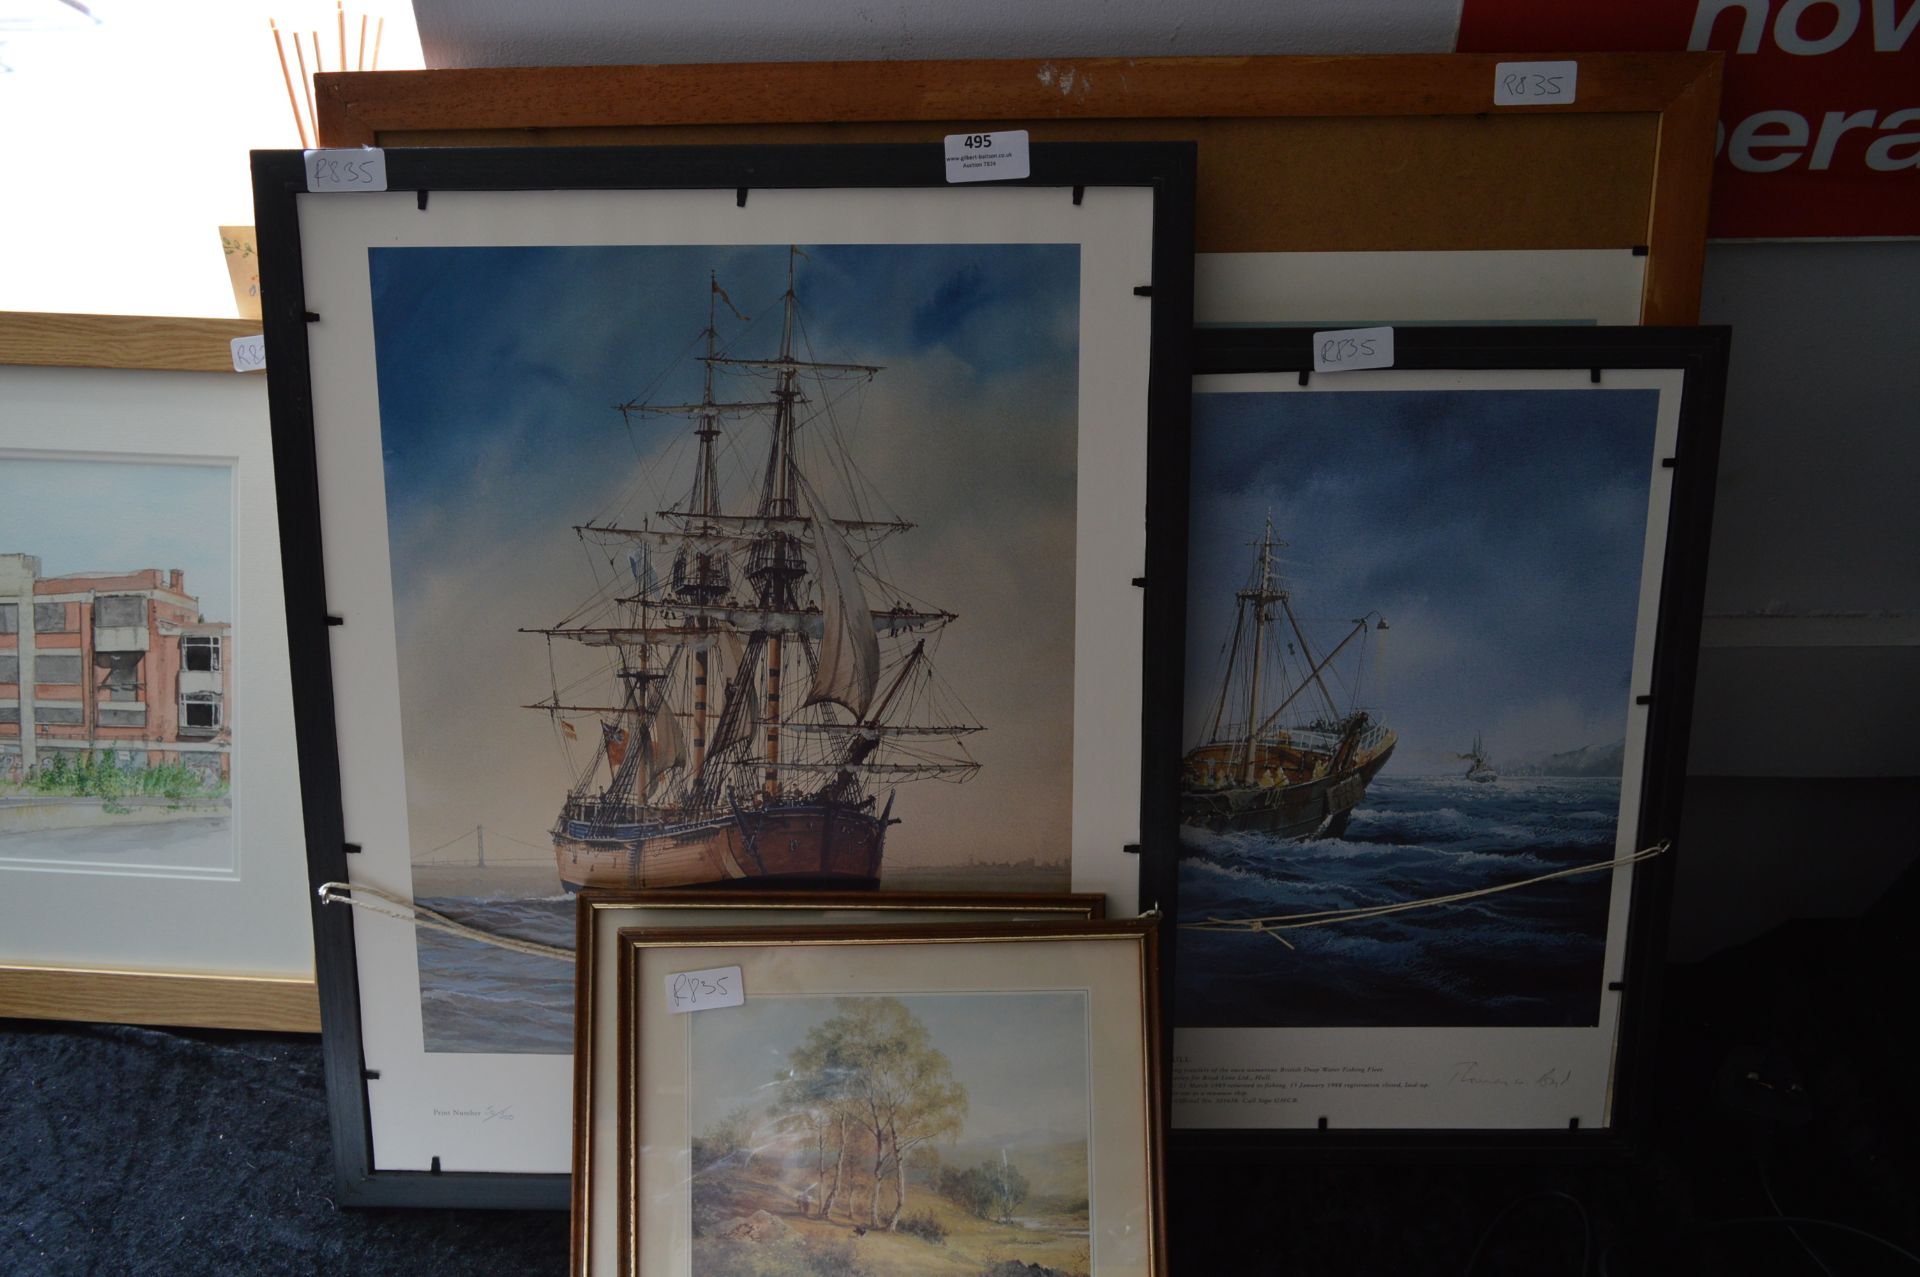 Three Limited Edition Adrian Thomson Signed Prints "Town Docks", "Arctic Corsair" and "Sail Boat"